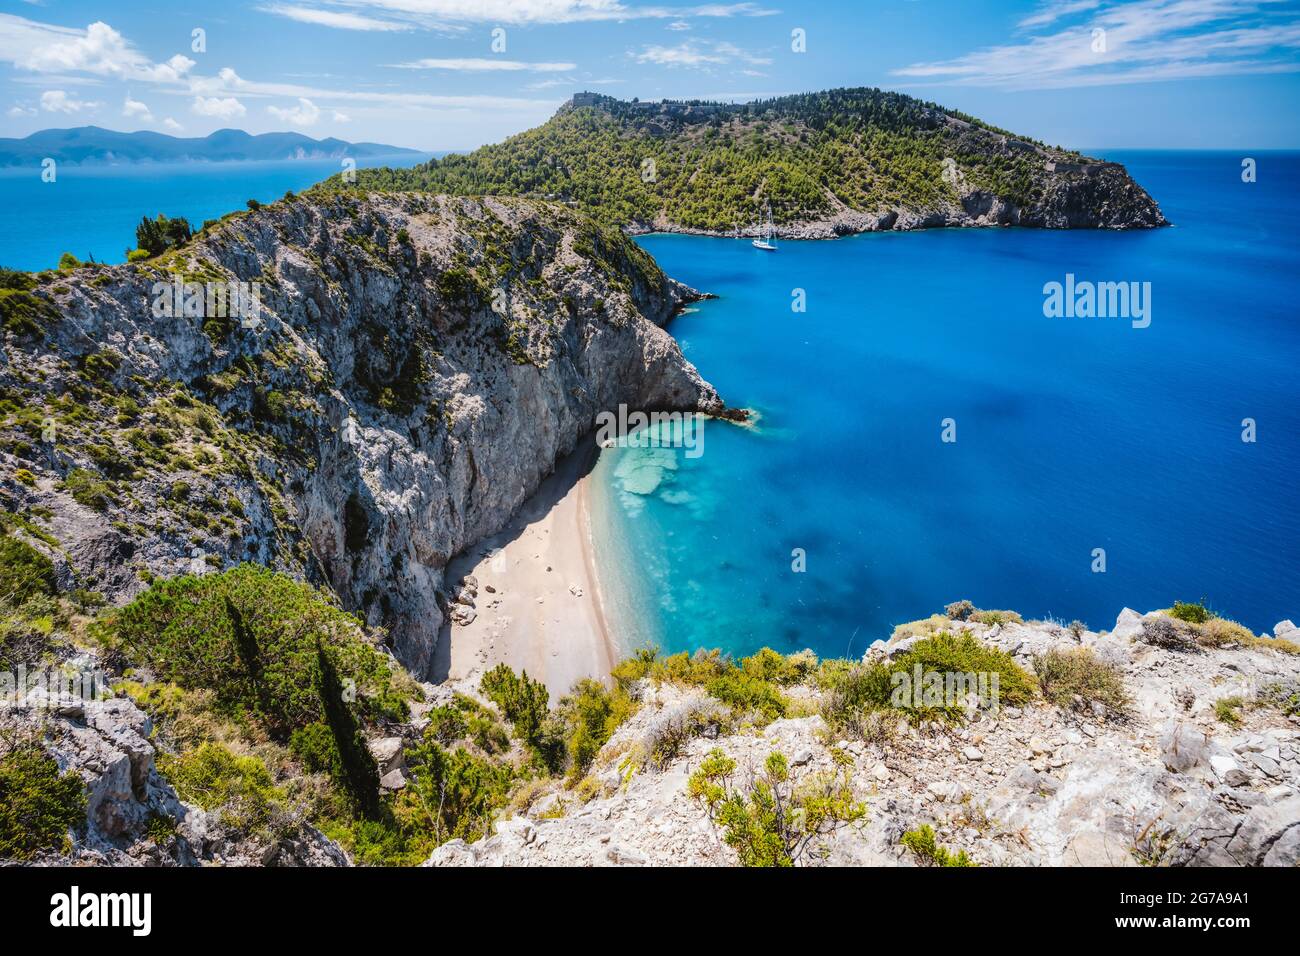 Aerial photo of beautiful and picturesque rocky coast close to Assos village on Cefalonia Ionian island, Greece Stock Photo